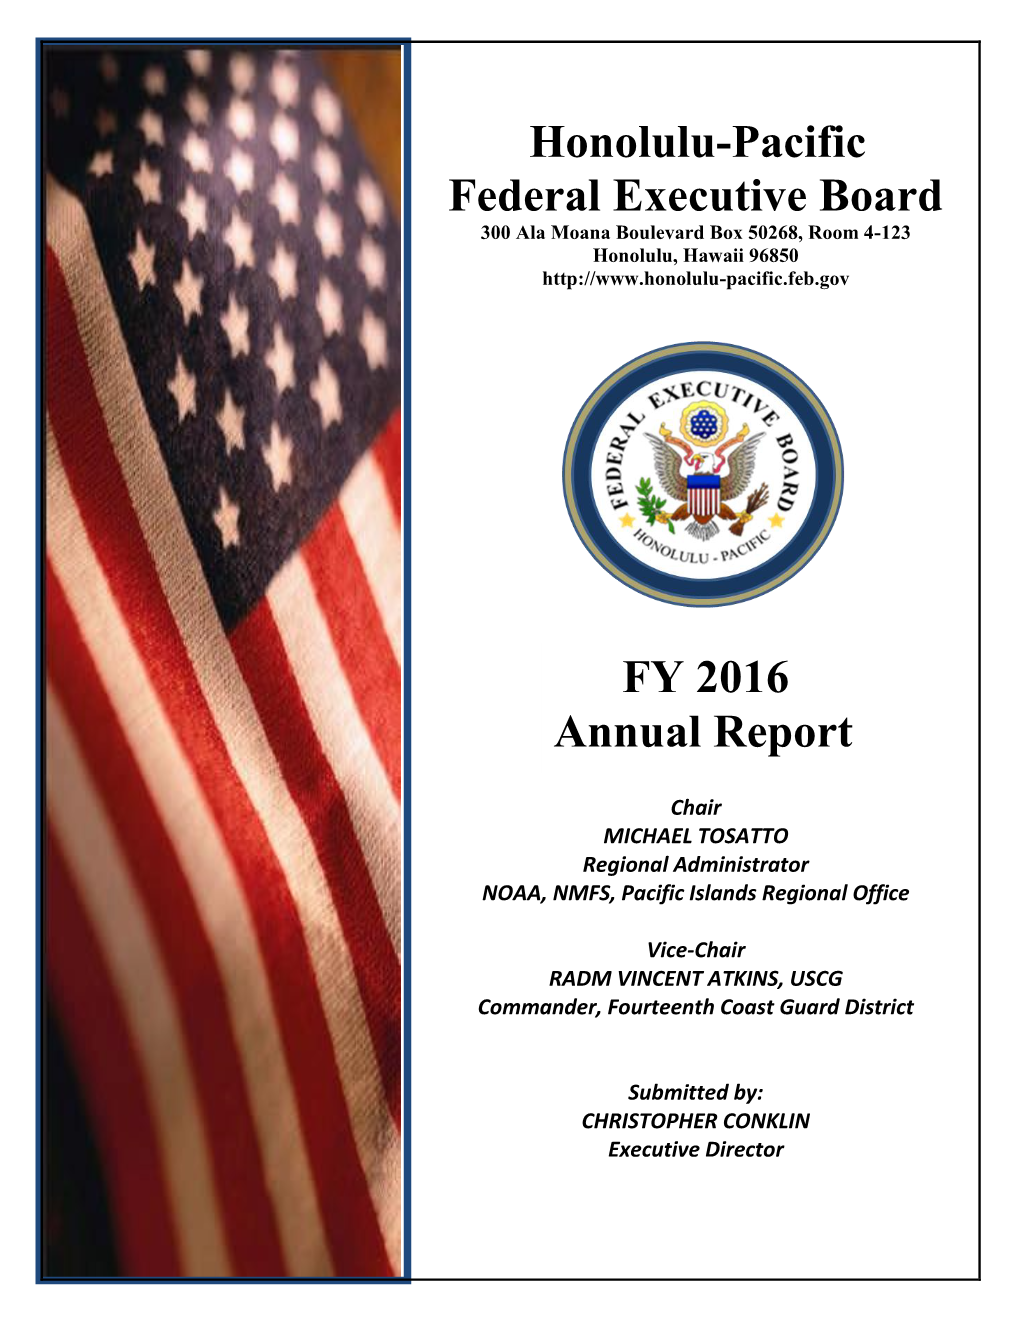 Honolulu-Pacific Federal Executive Board FY 2016 Annual Report